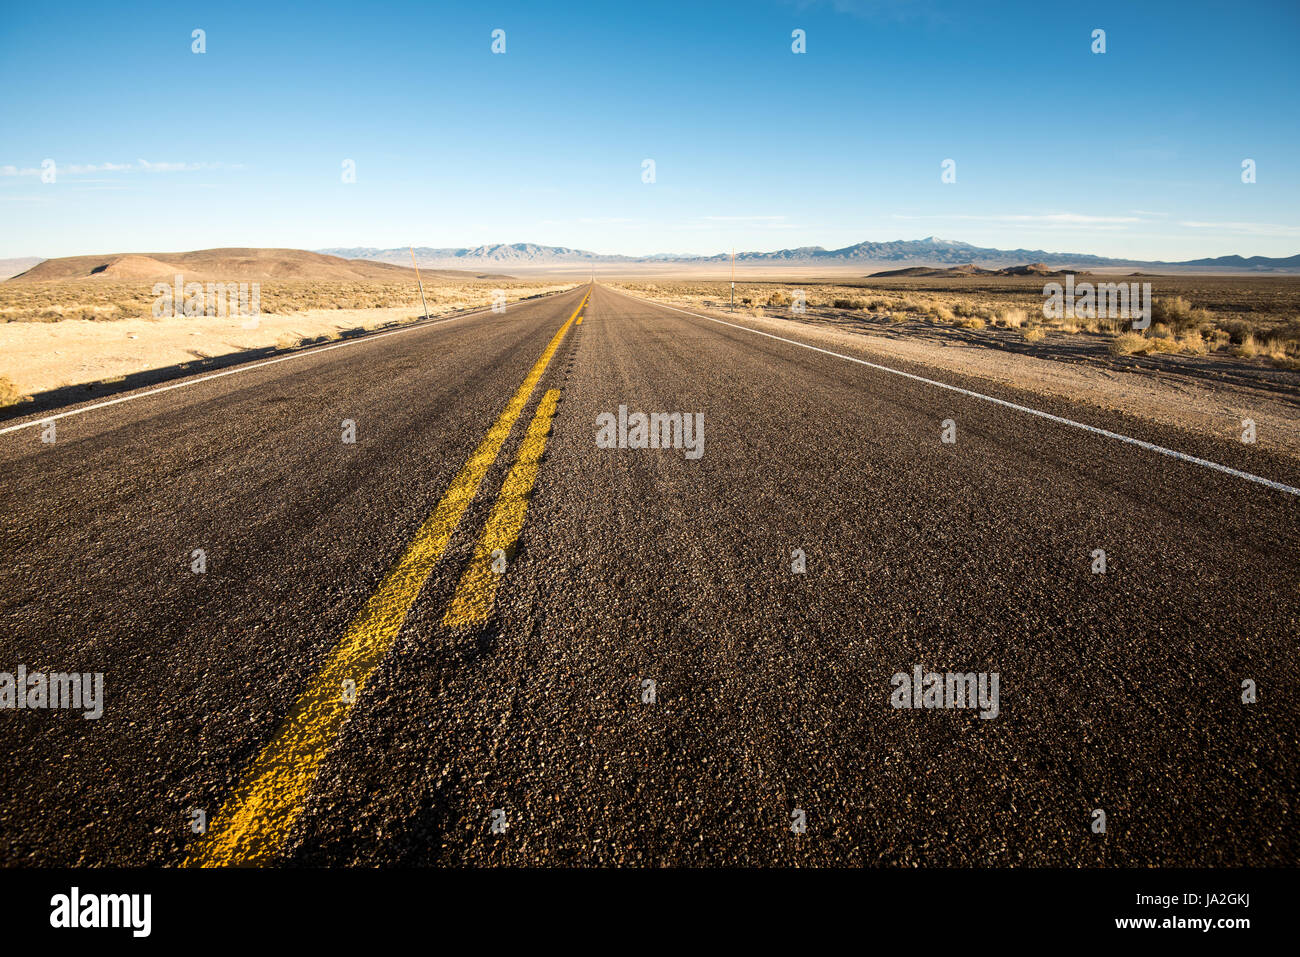 State Highway 375, known as the 'Extraterrestrial Highway', crosses a lonely expanse of the Nevada desert near Area 51. Stock Photo